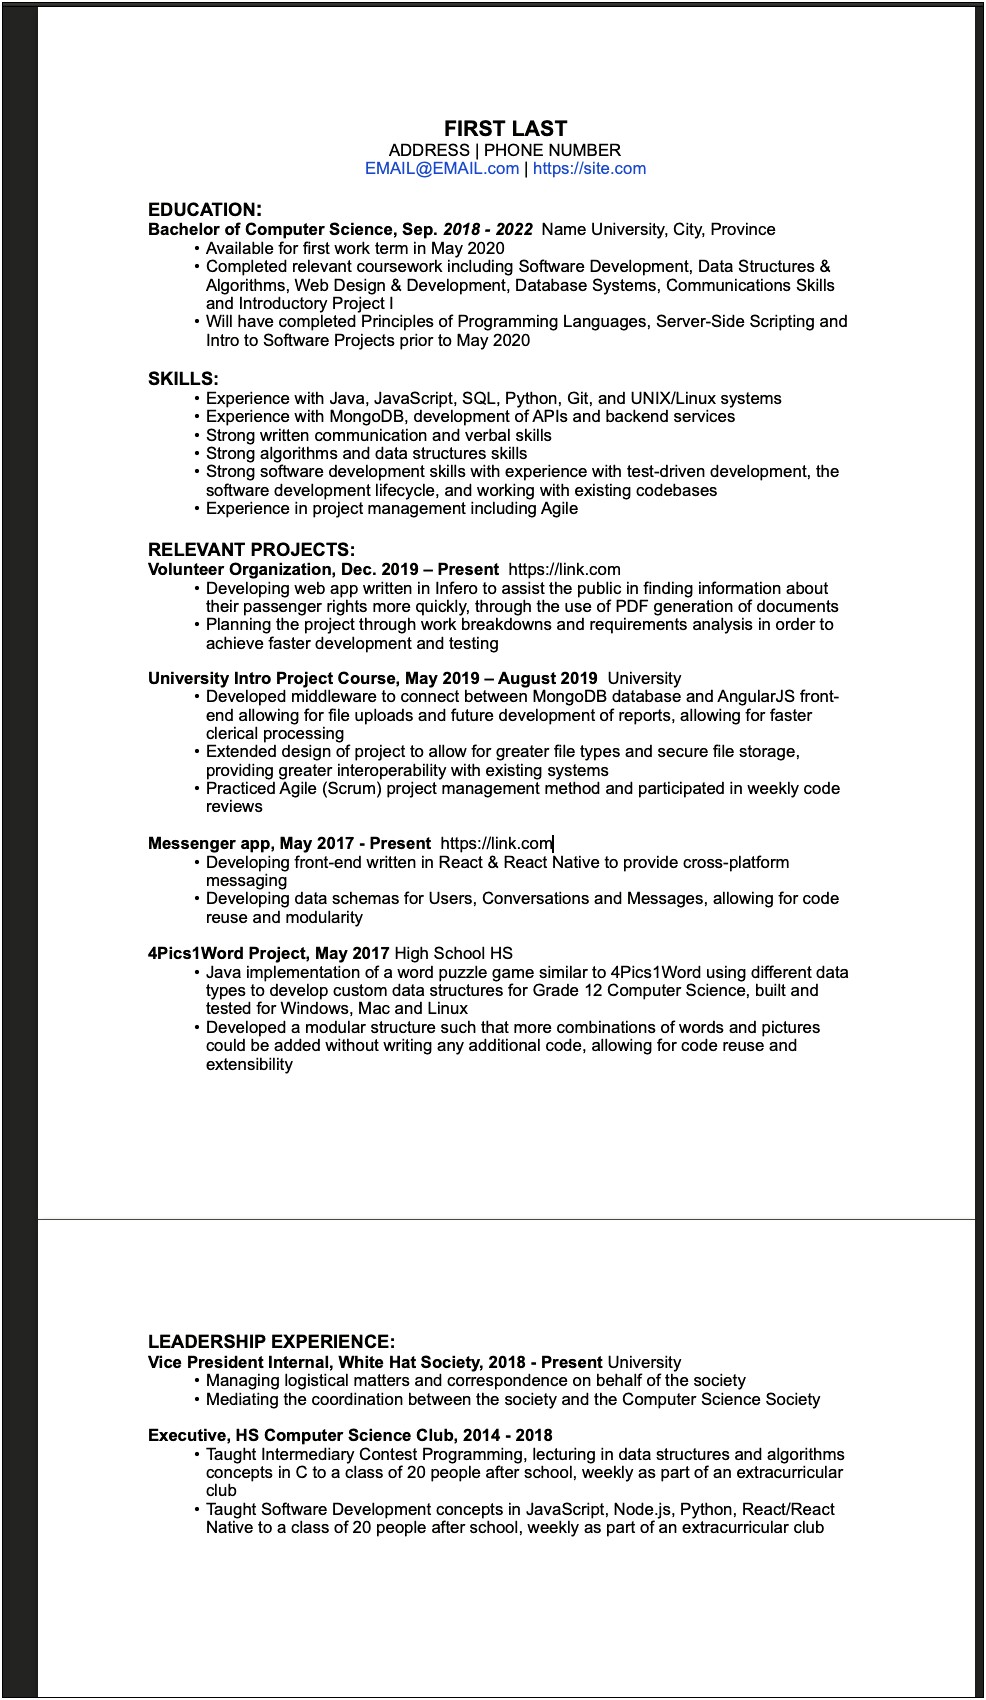 Resume Action Words For Computer Science